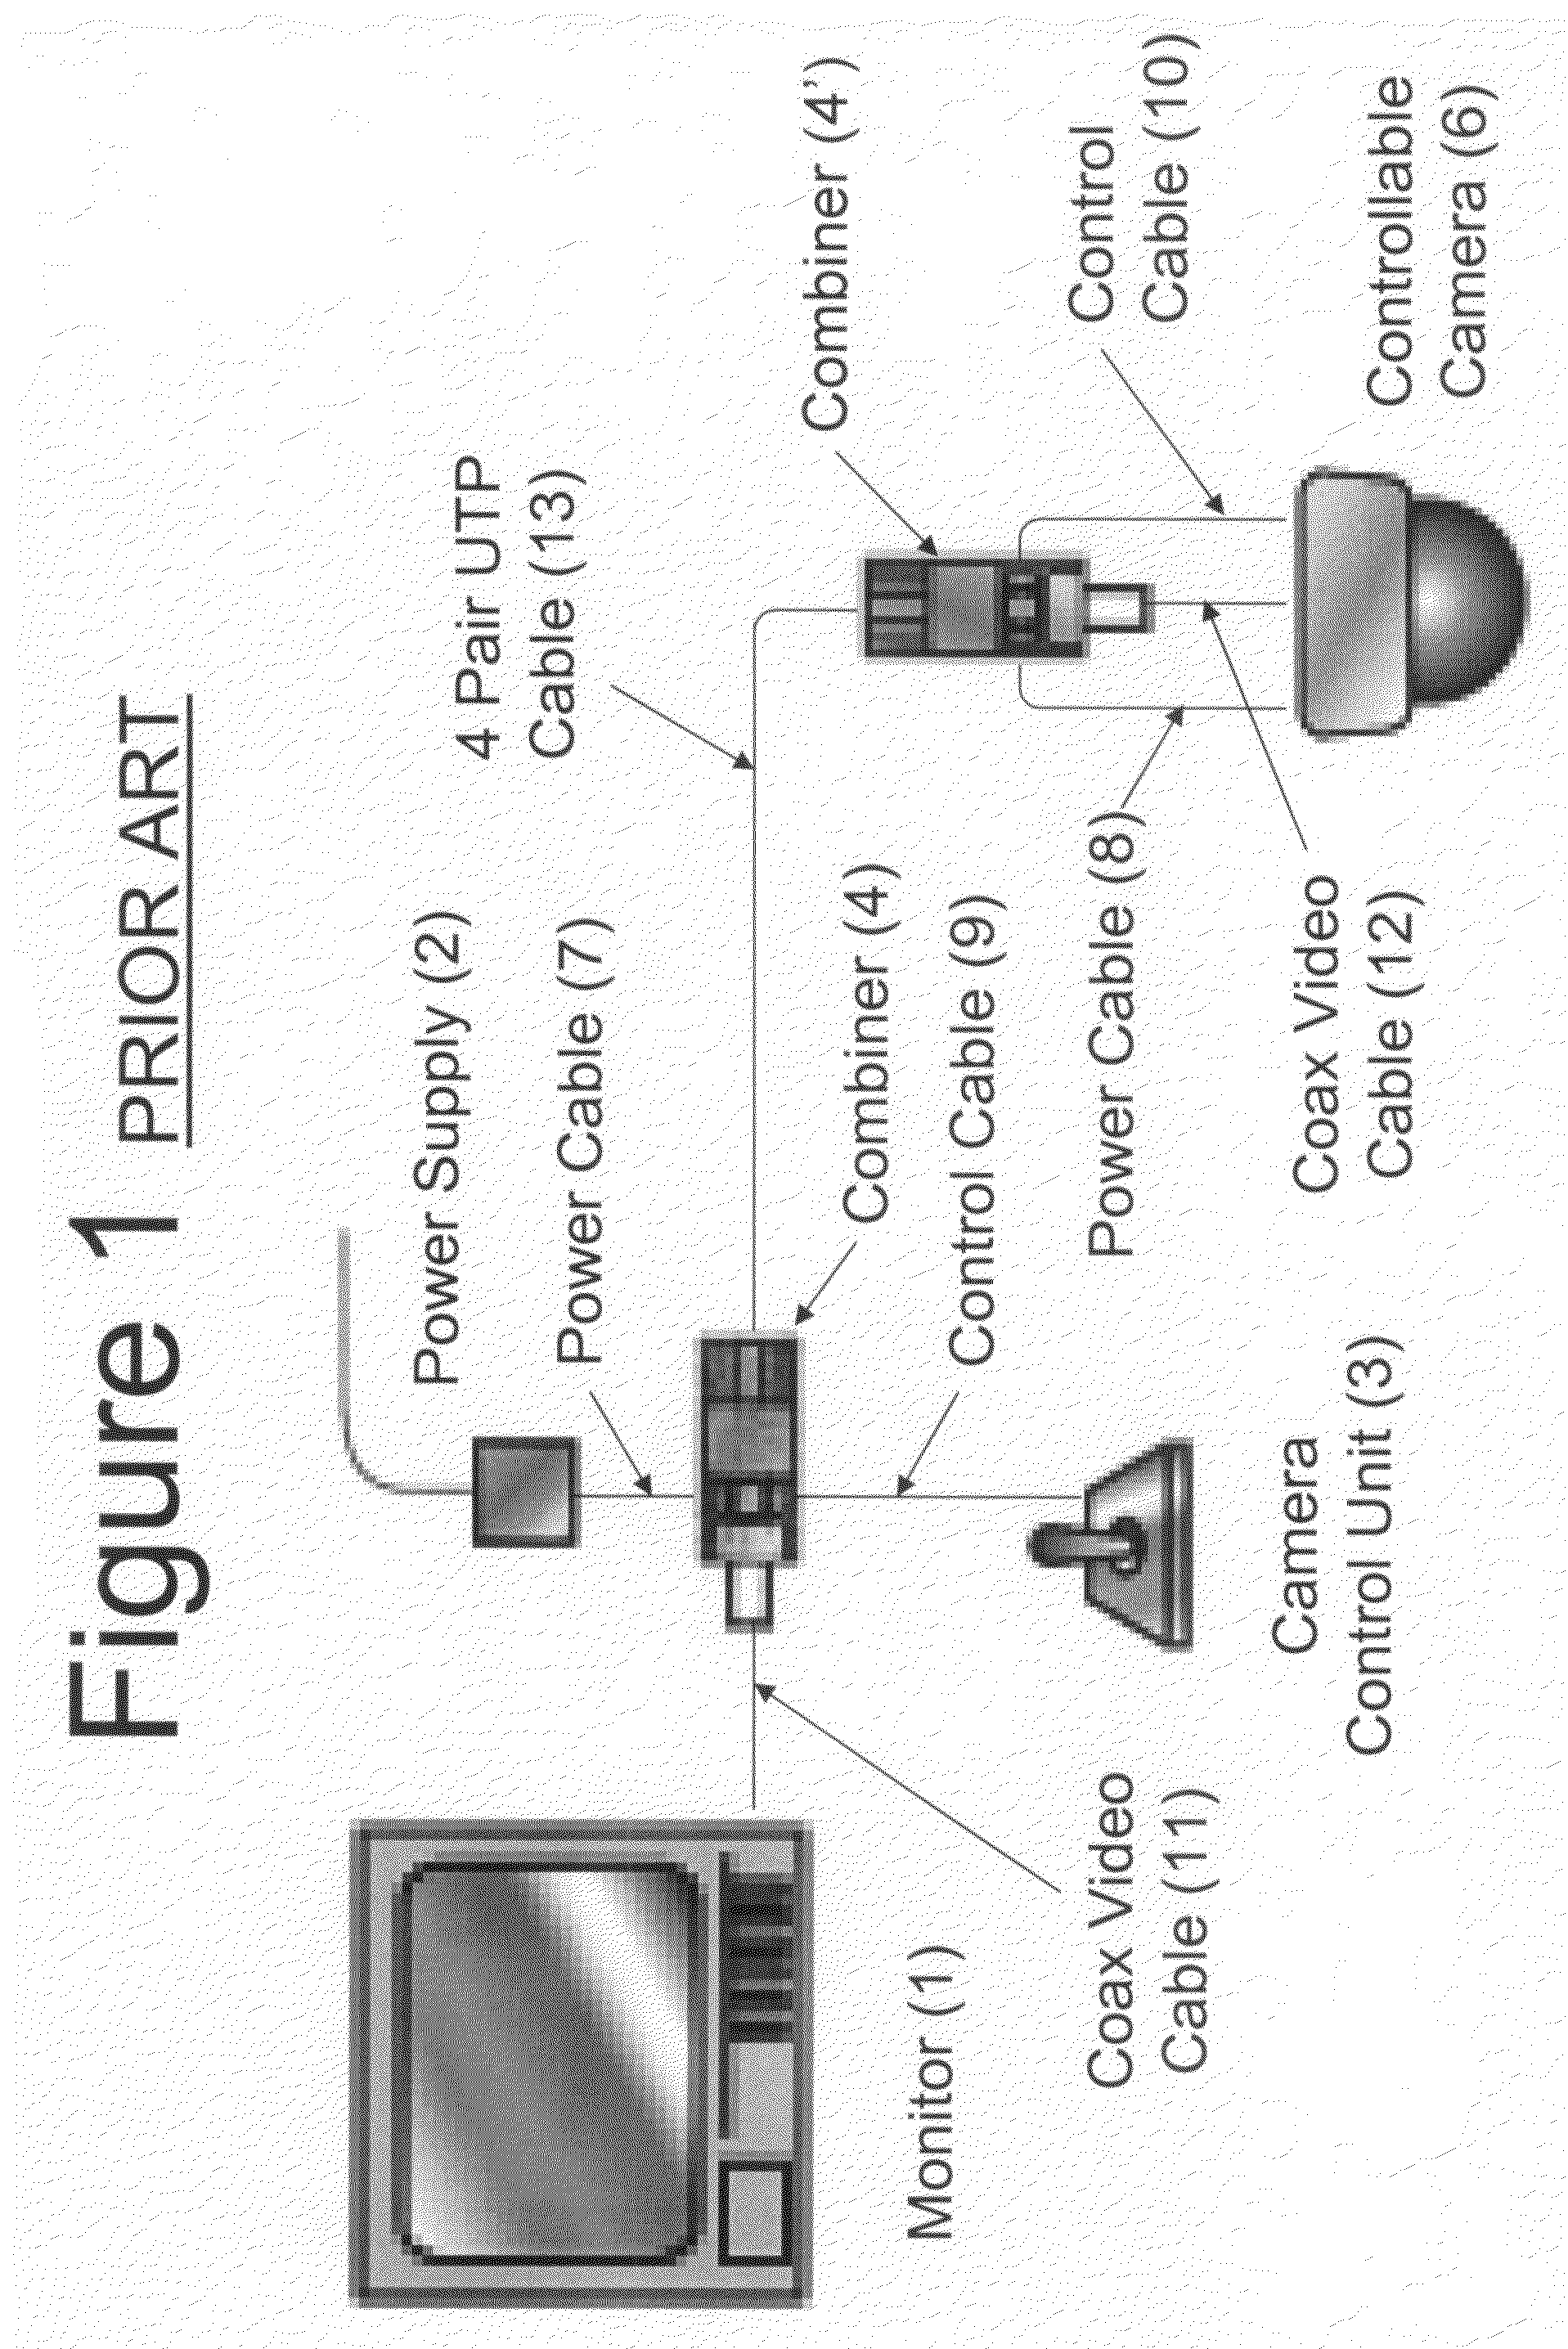 Video surveillance system and method